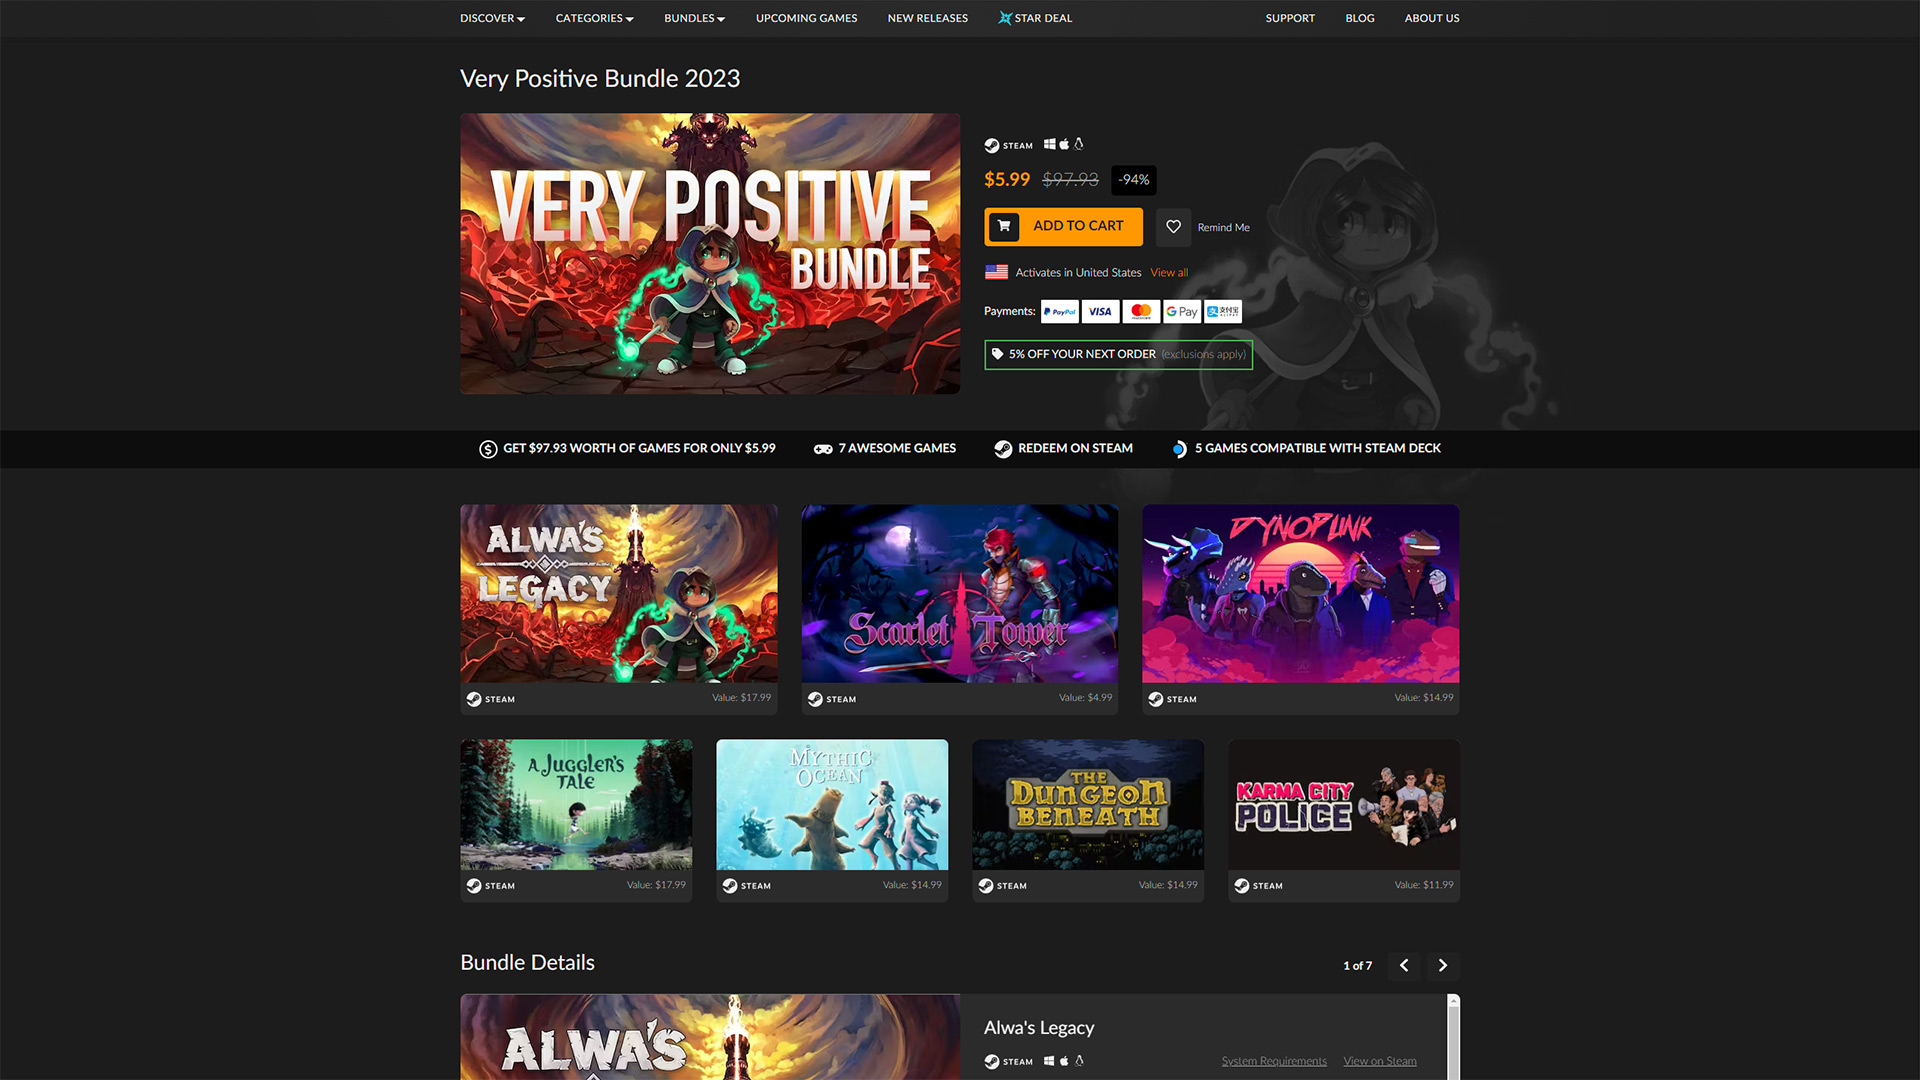 This bundle features games that have received a "Very Positive" rating on Steam